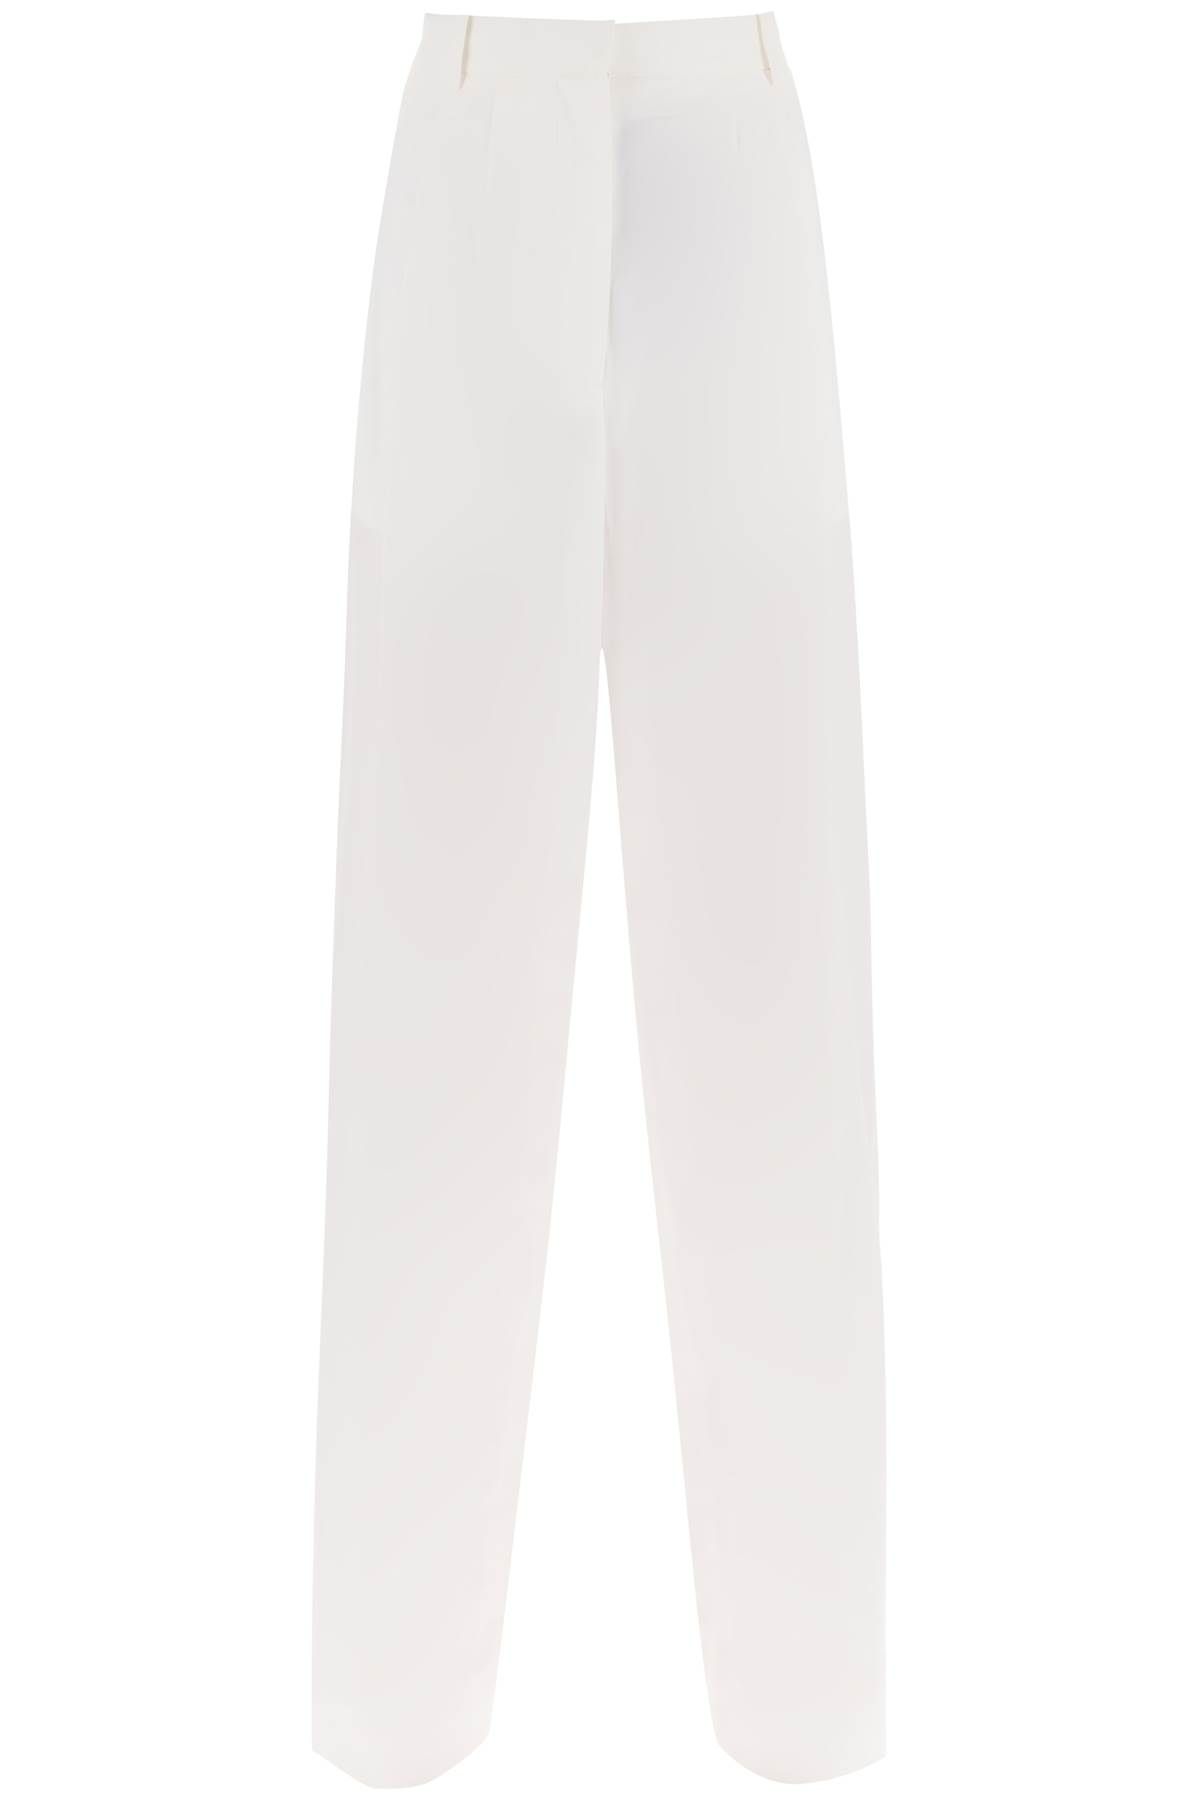 The Row 'bufus' Pants In Cotton Poplin In White